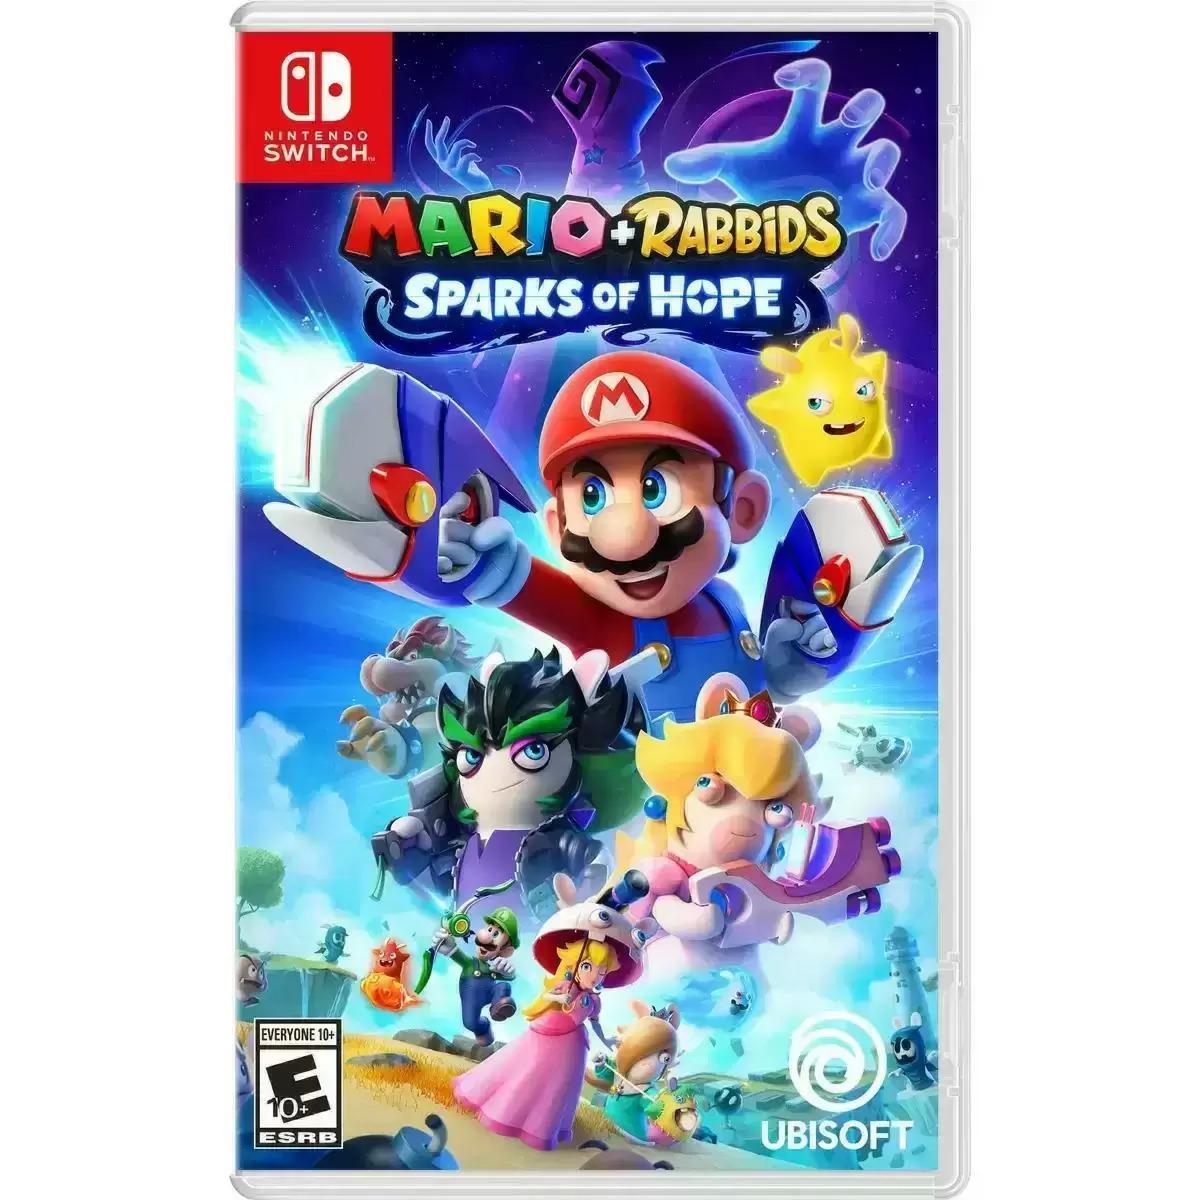 Mario + Rabbids Sparks of Hope Nintendo Switch for $29.99 Shipped